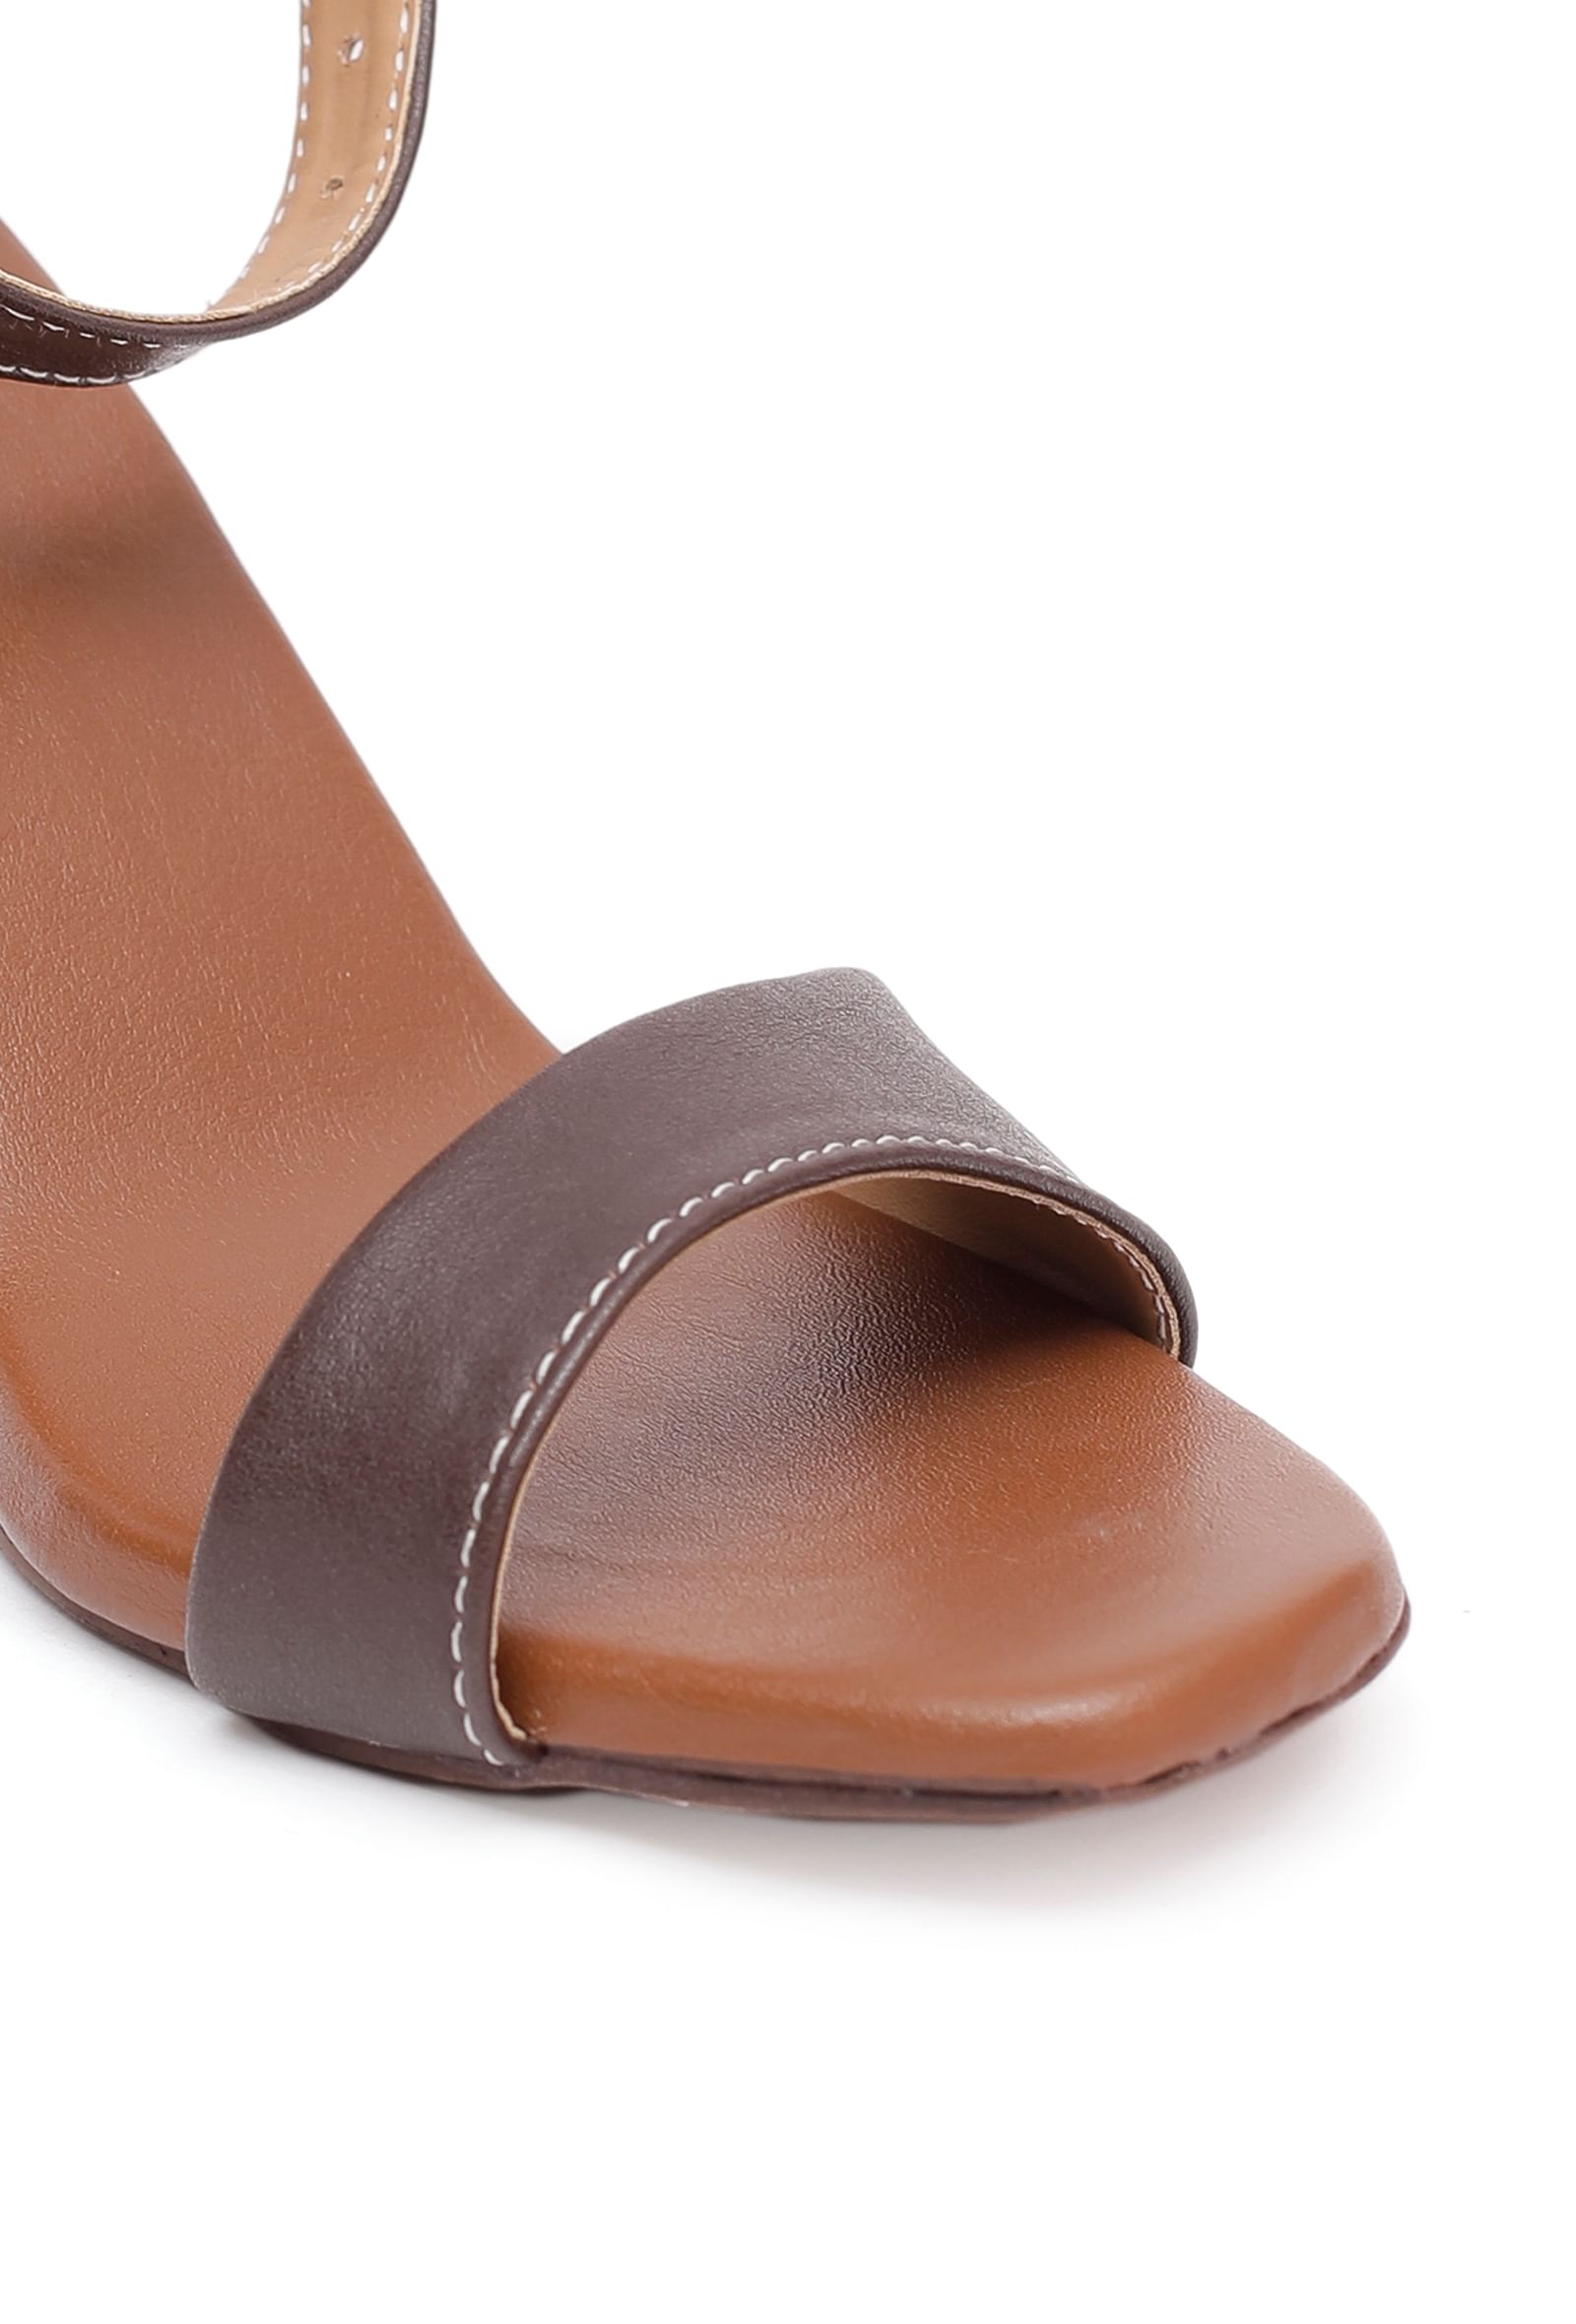 Elegant Brown Sandals For Women, Minimalist Chunky Heeled Ankle Strap  Sandals | SHEIN